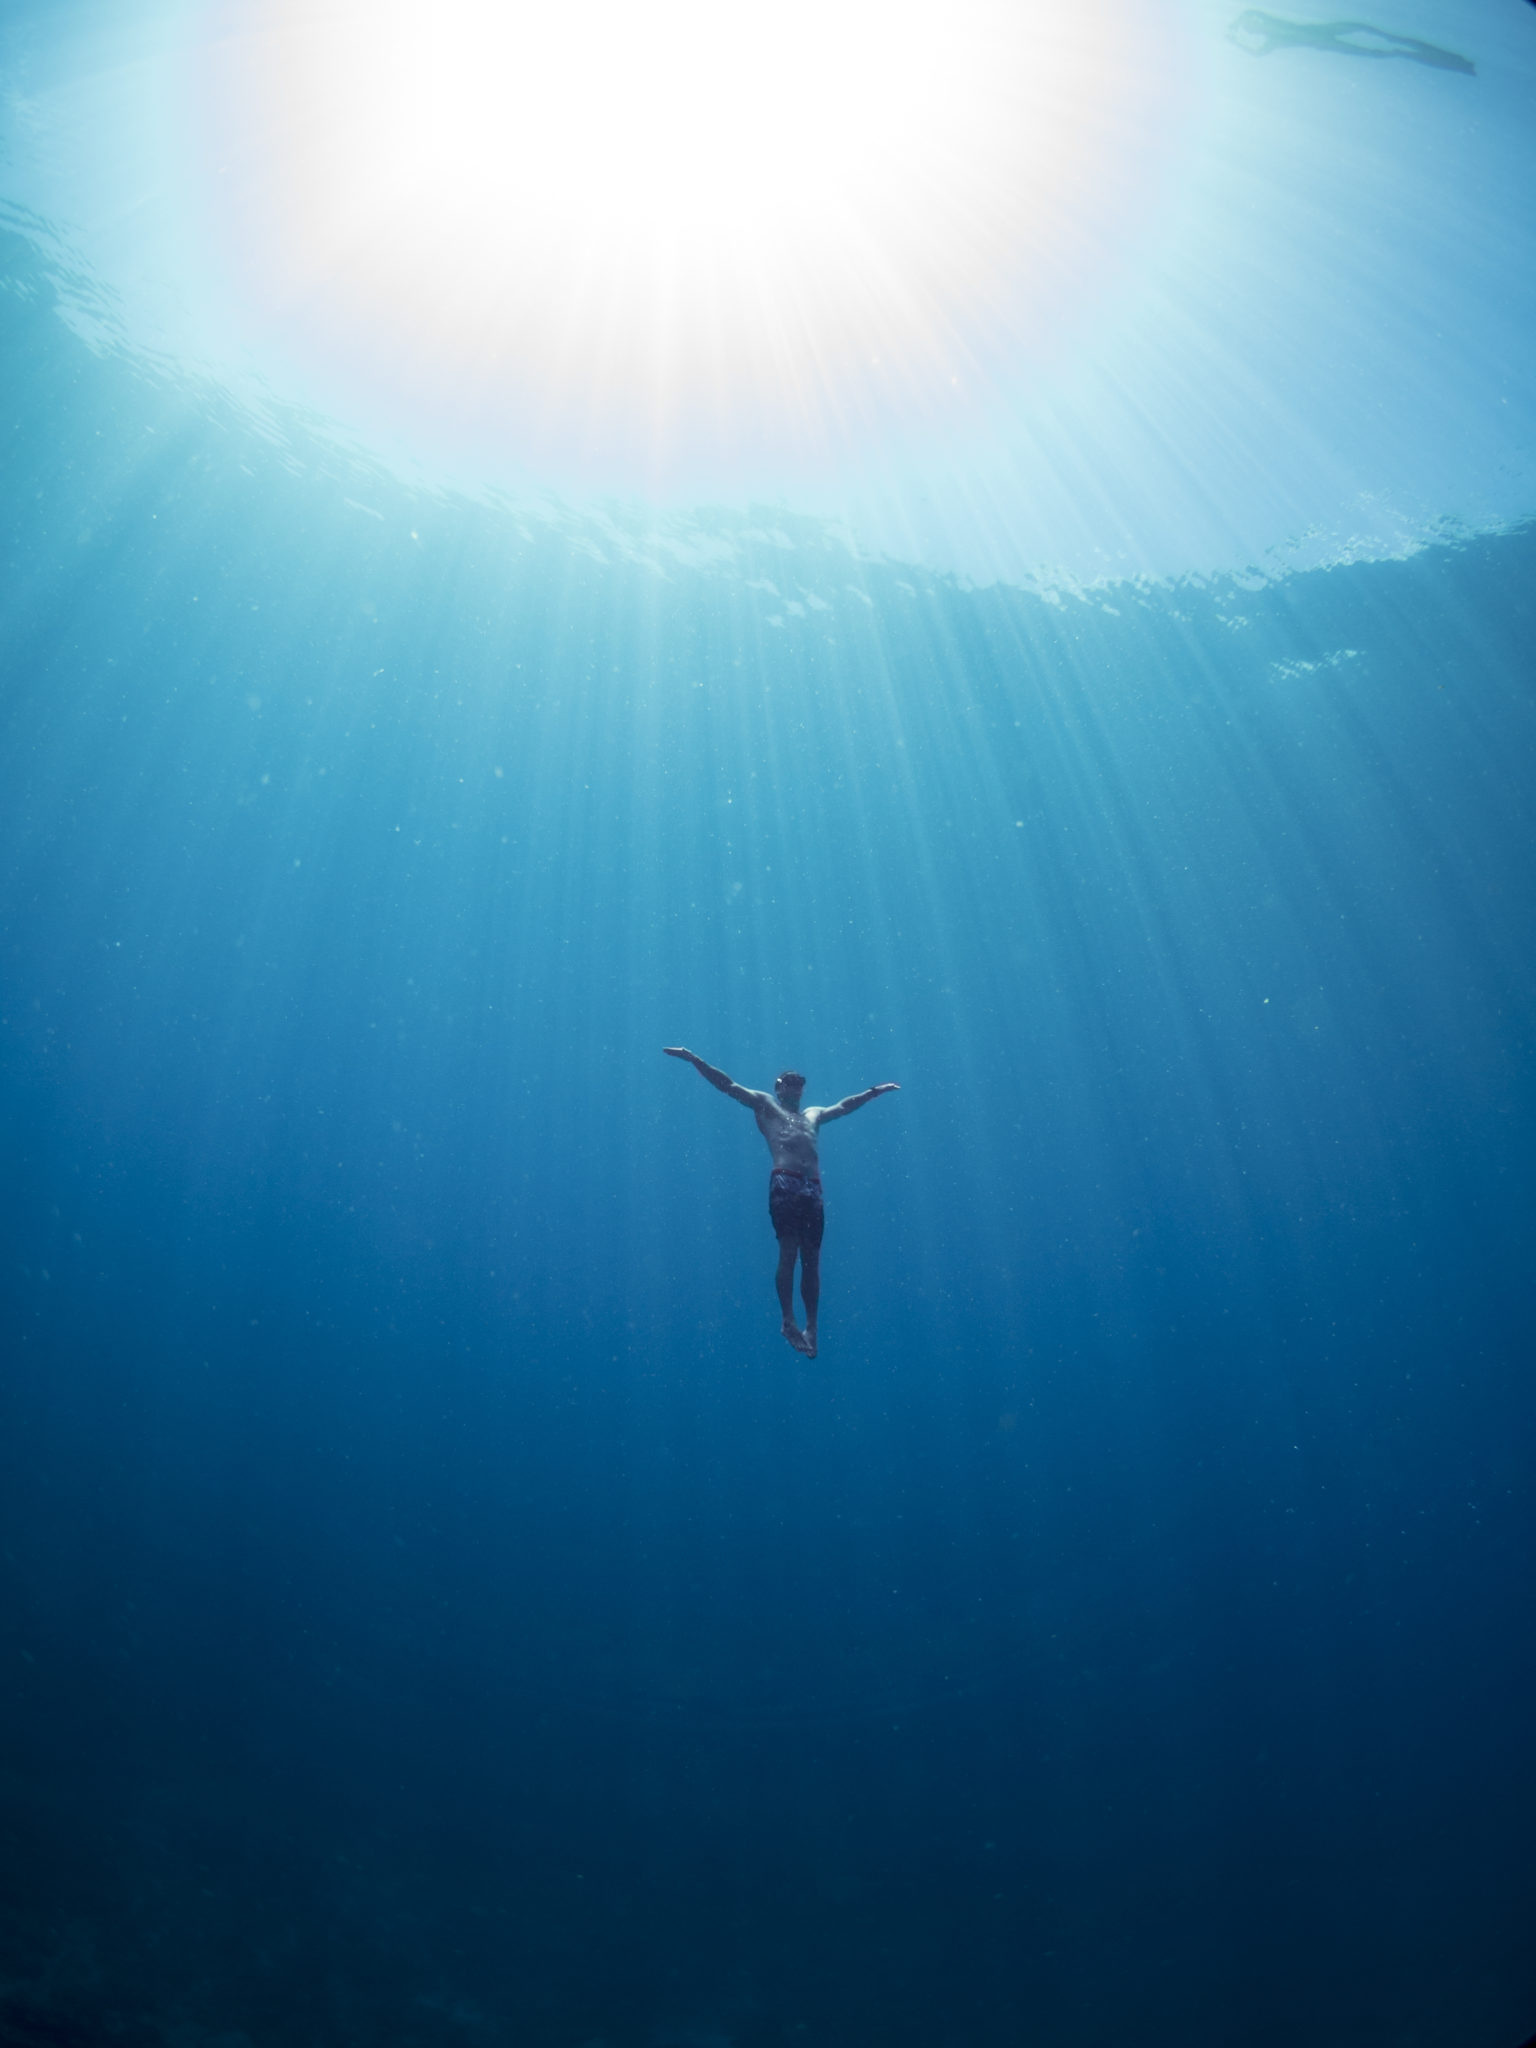 Freediving: A lonely skin diver, Recreational underwater activity and sport. 1540x2050 HD Wallpaper.